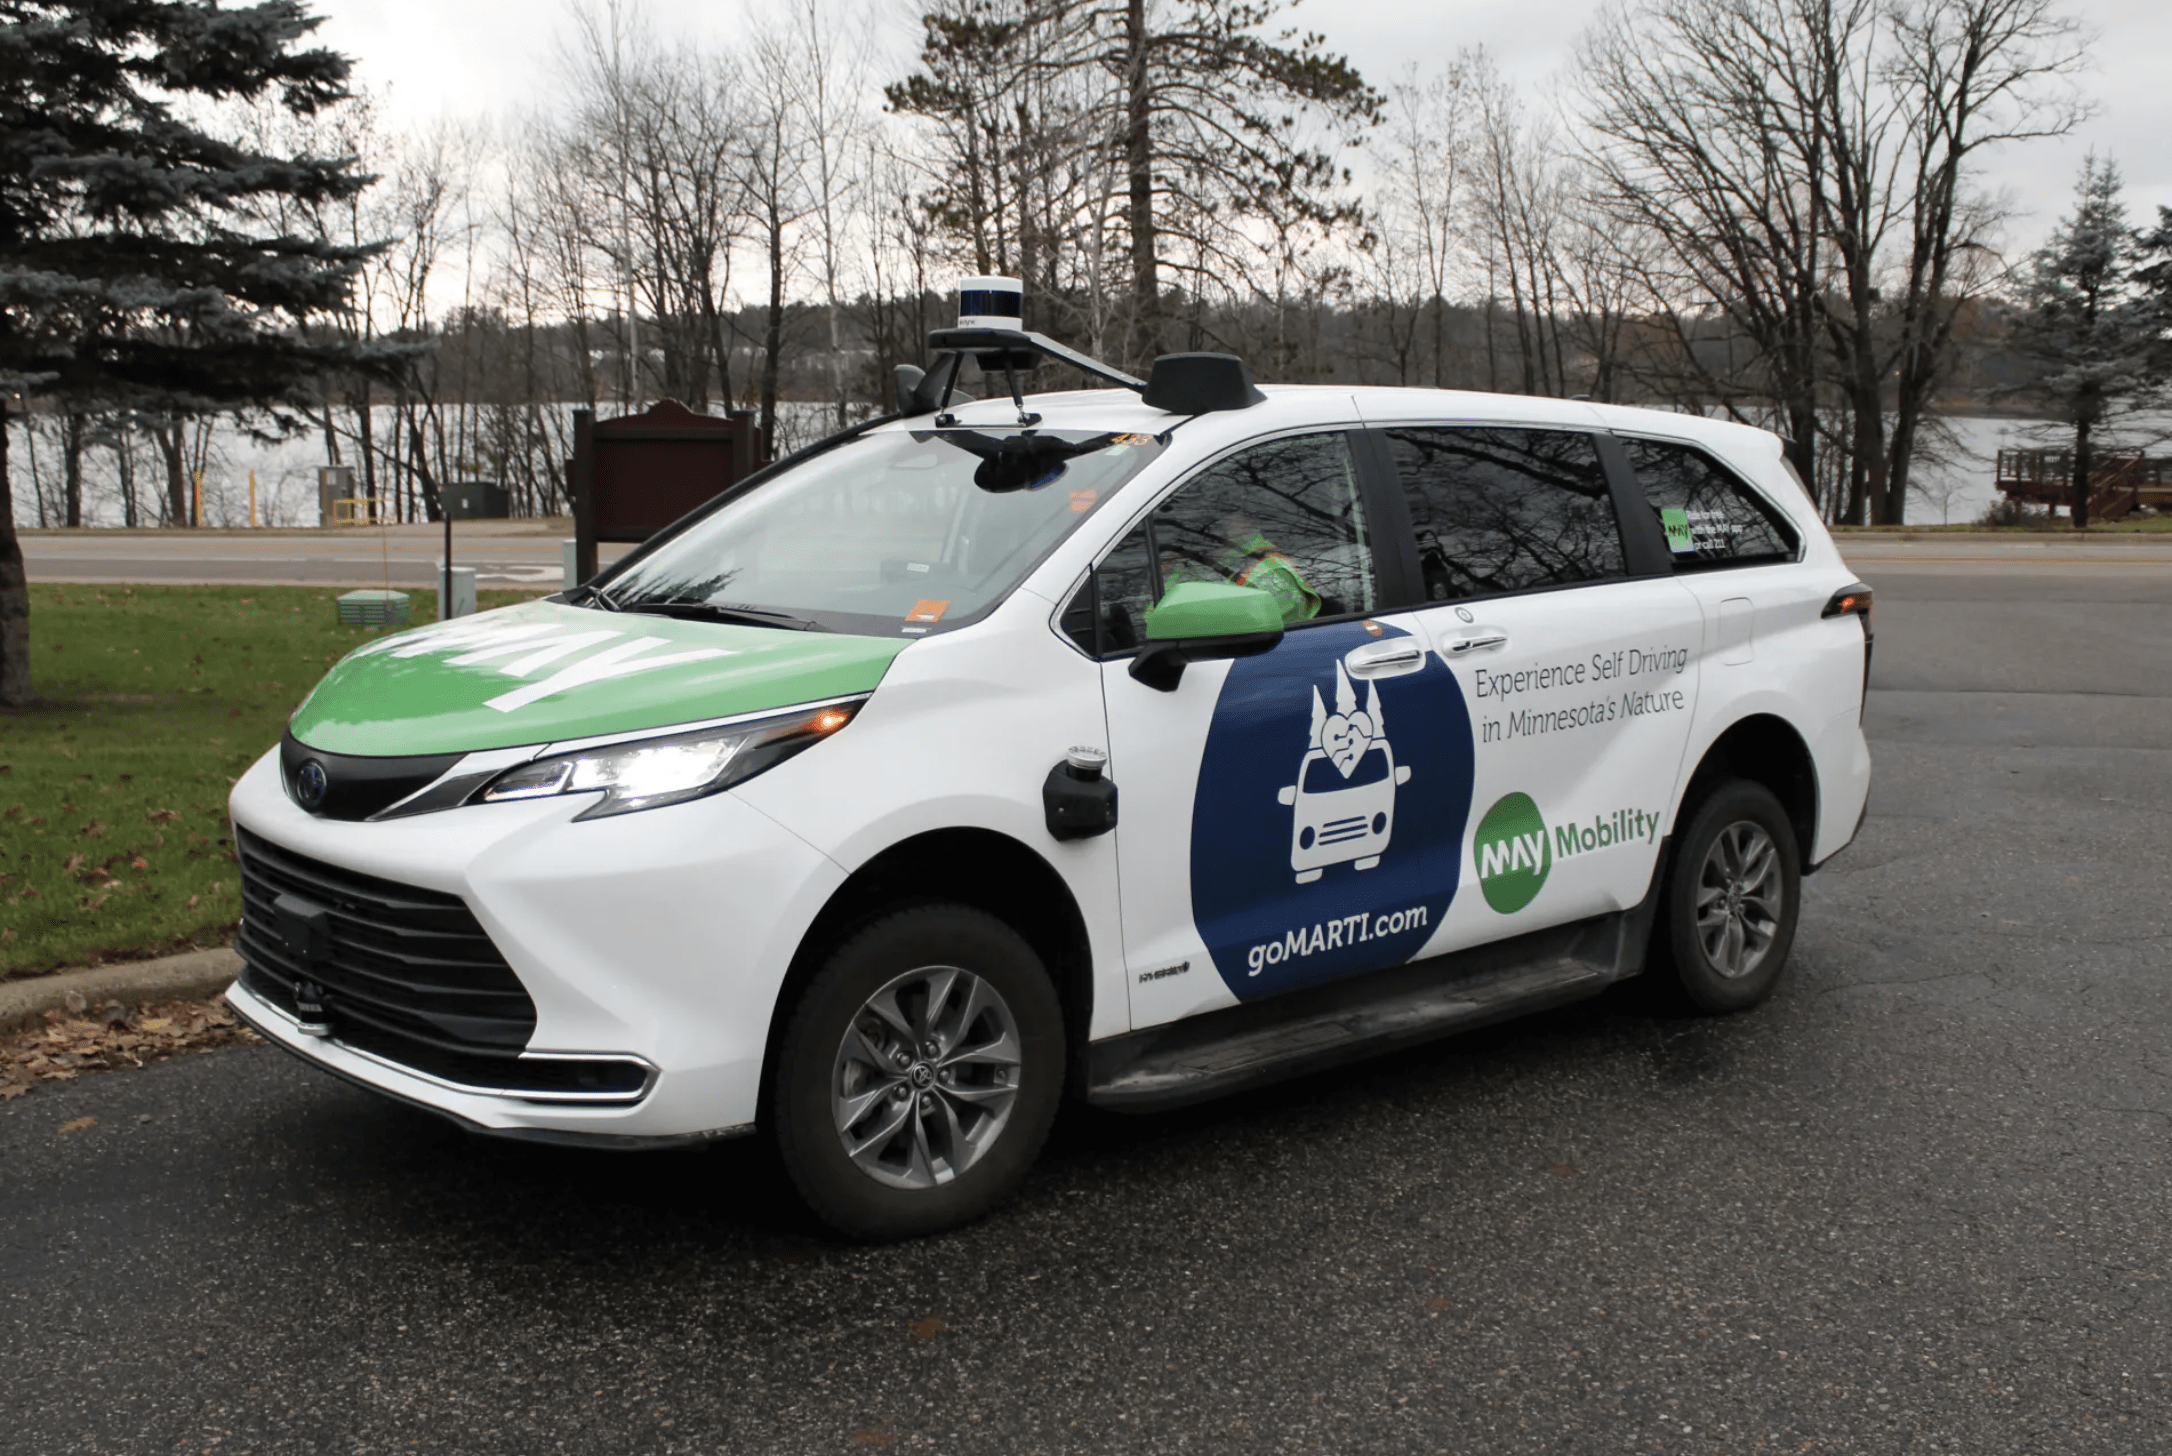 One of the five self-driving vans now serving the northern Minnesota community of Grand Rapids. The vans are part of a program called “goMARTI,” which stands for Minnesota’s Autonomous Rural Transit Initiative. (TONY LEYS/KFF HEALTH NEWS)